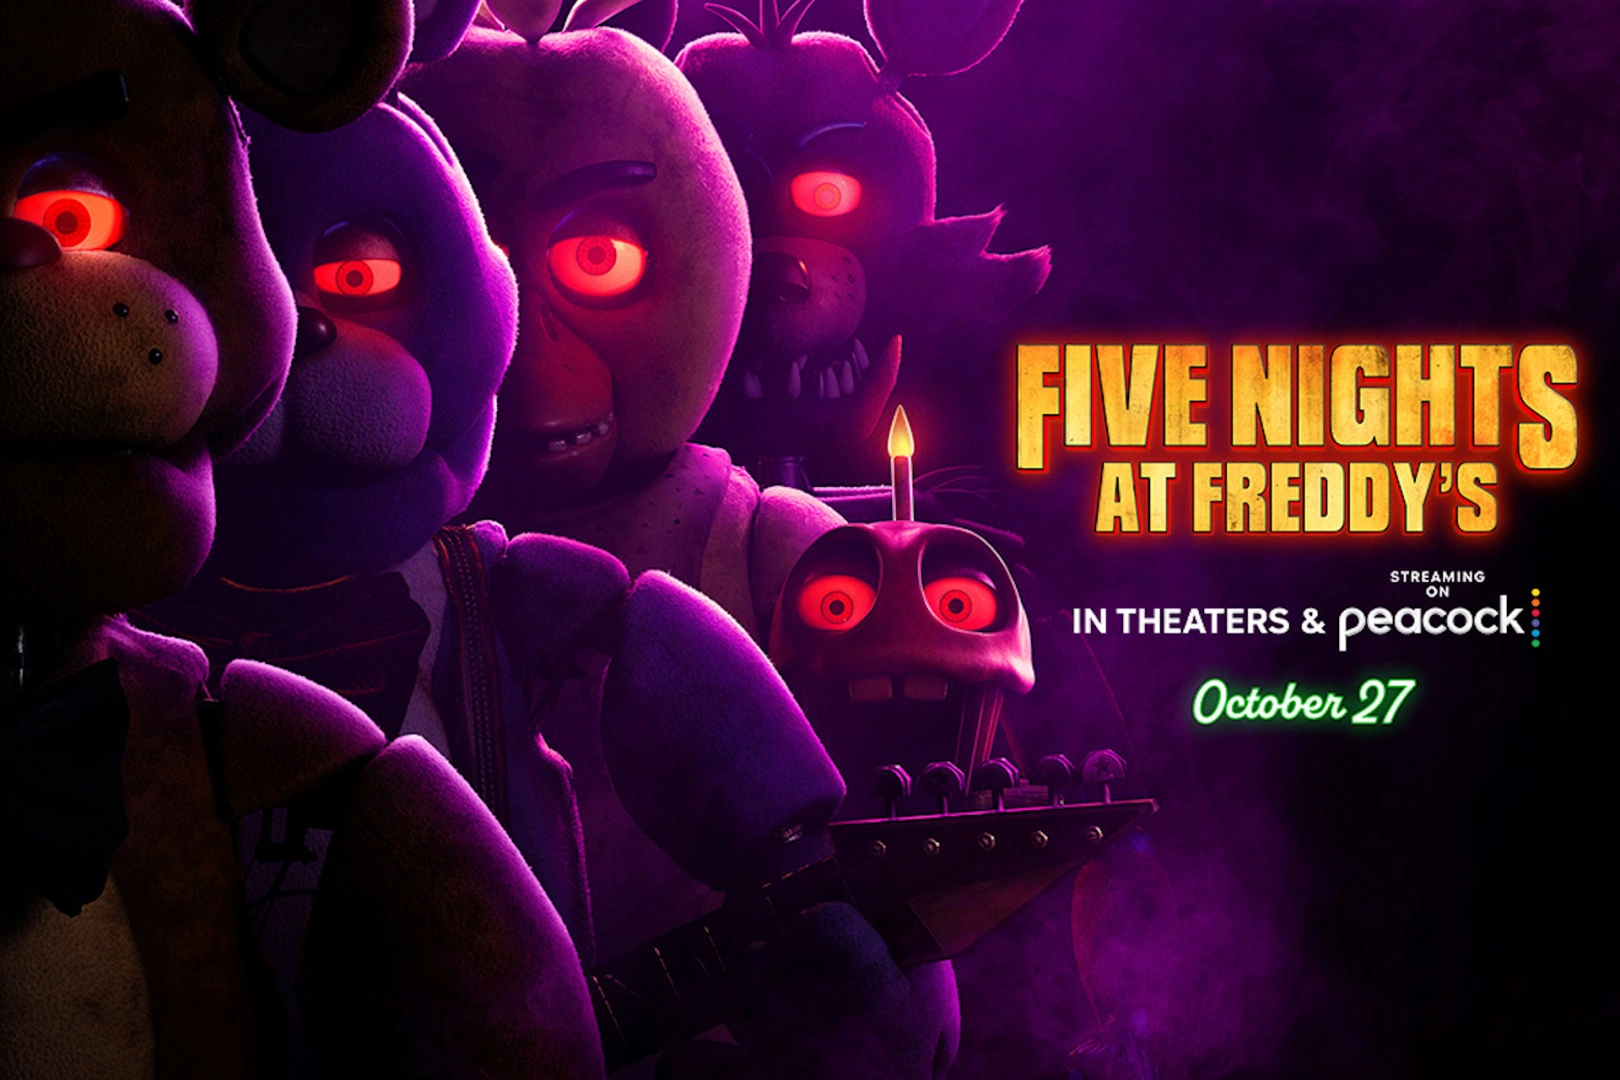 Countdown to Five Nights at Freddy's online